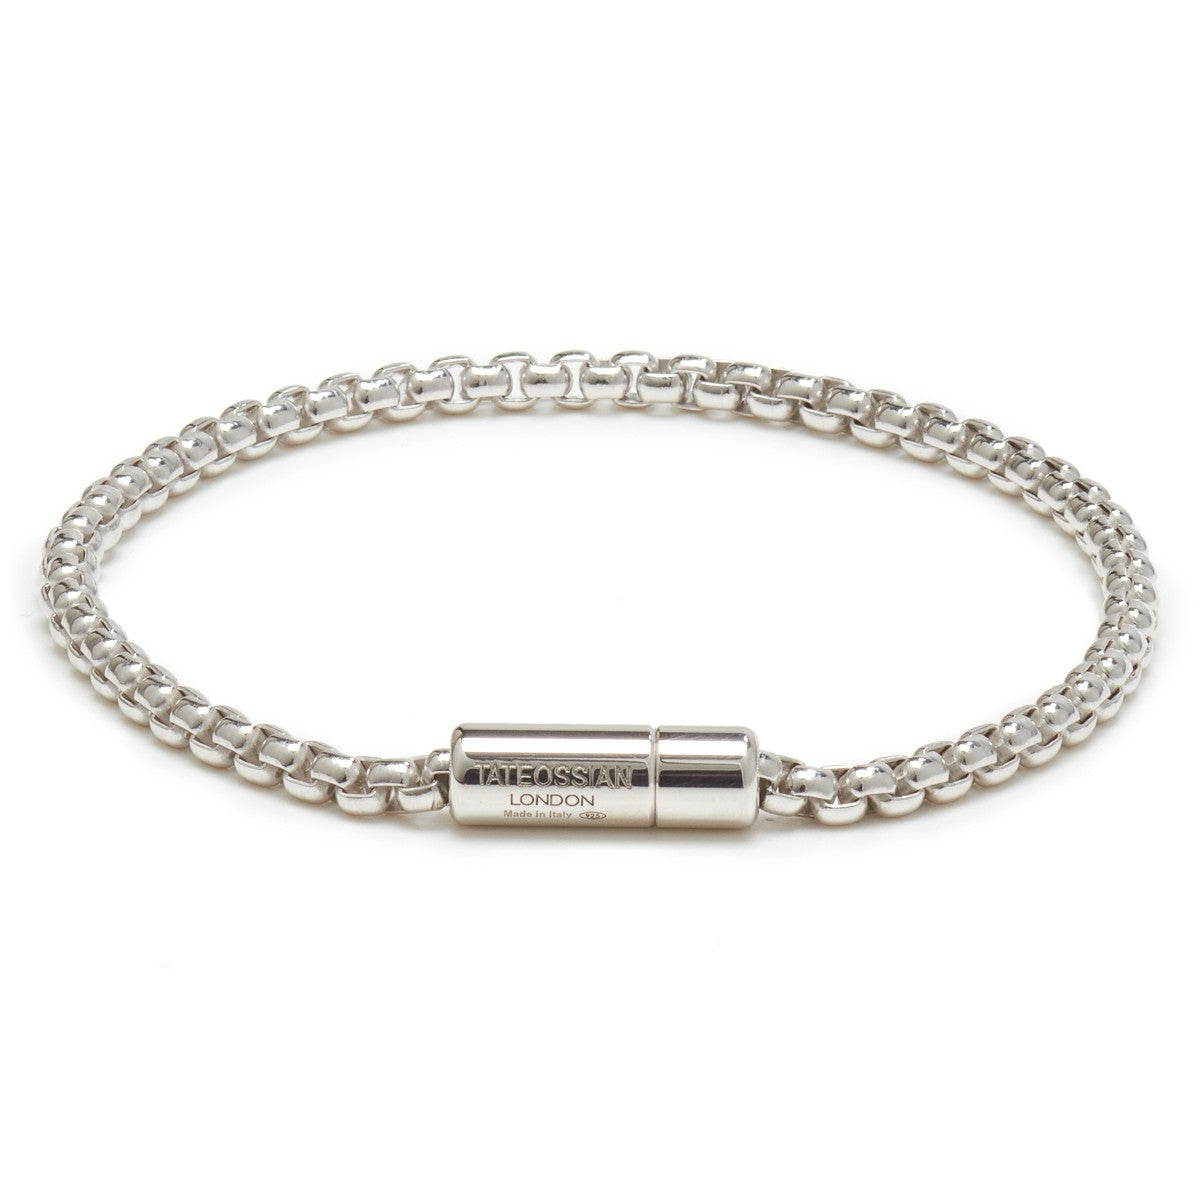 Tateossian Sterling Silver Chain Bracelet Men's Classic Collection